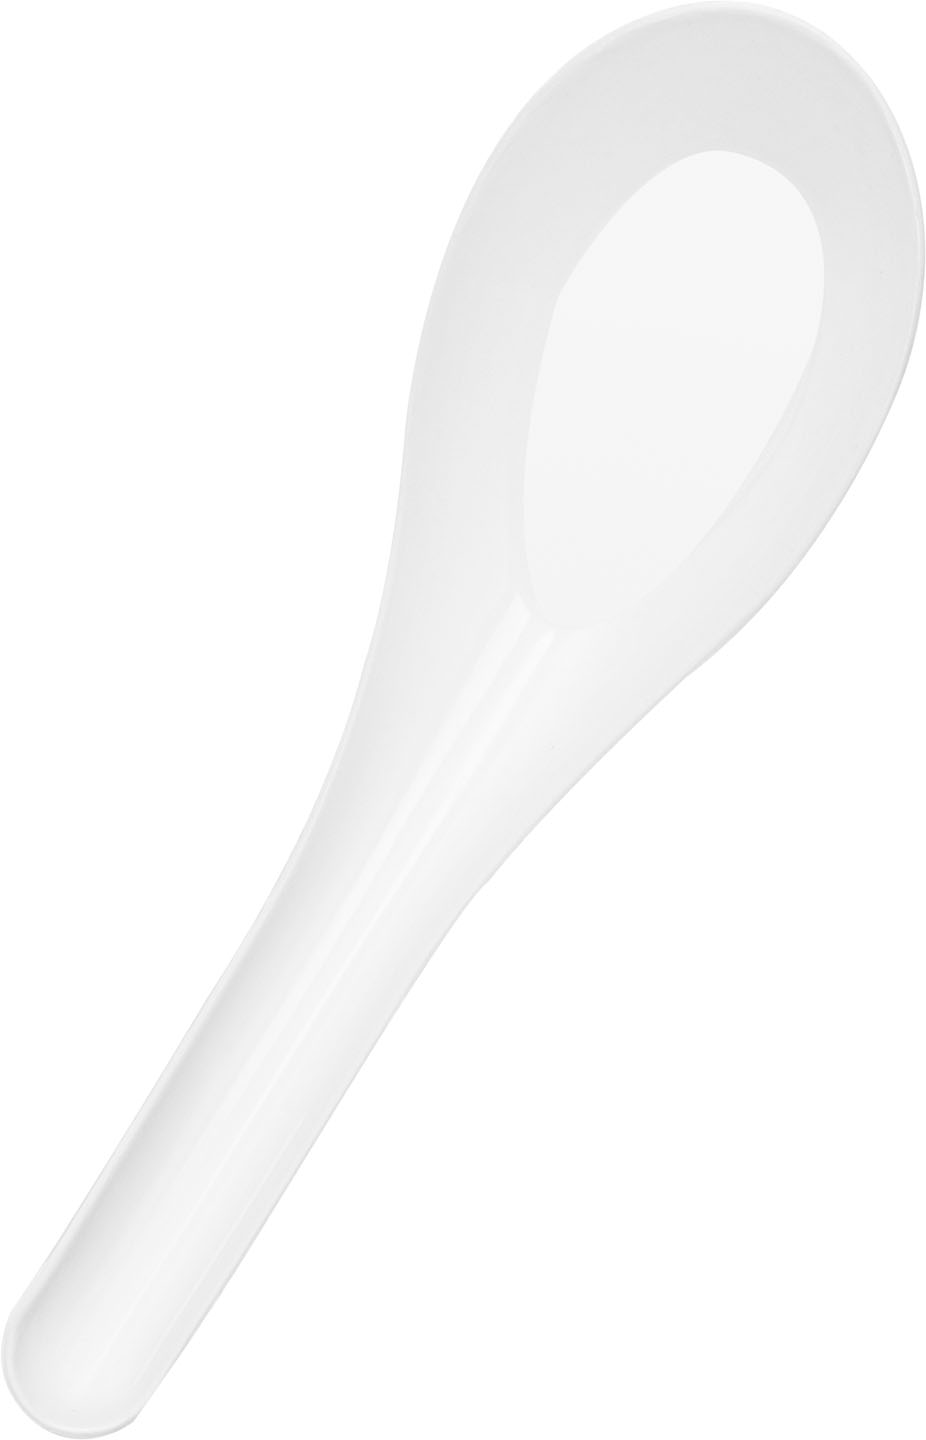 WY UTENSILS - CHINESE SOUP SPOON